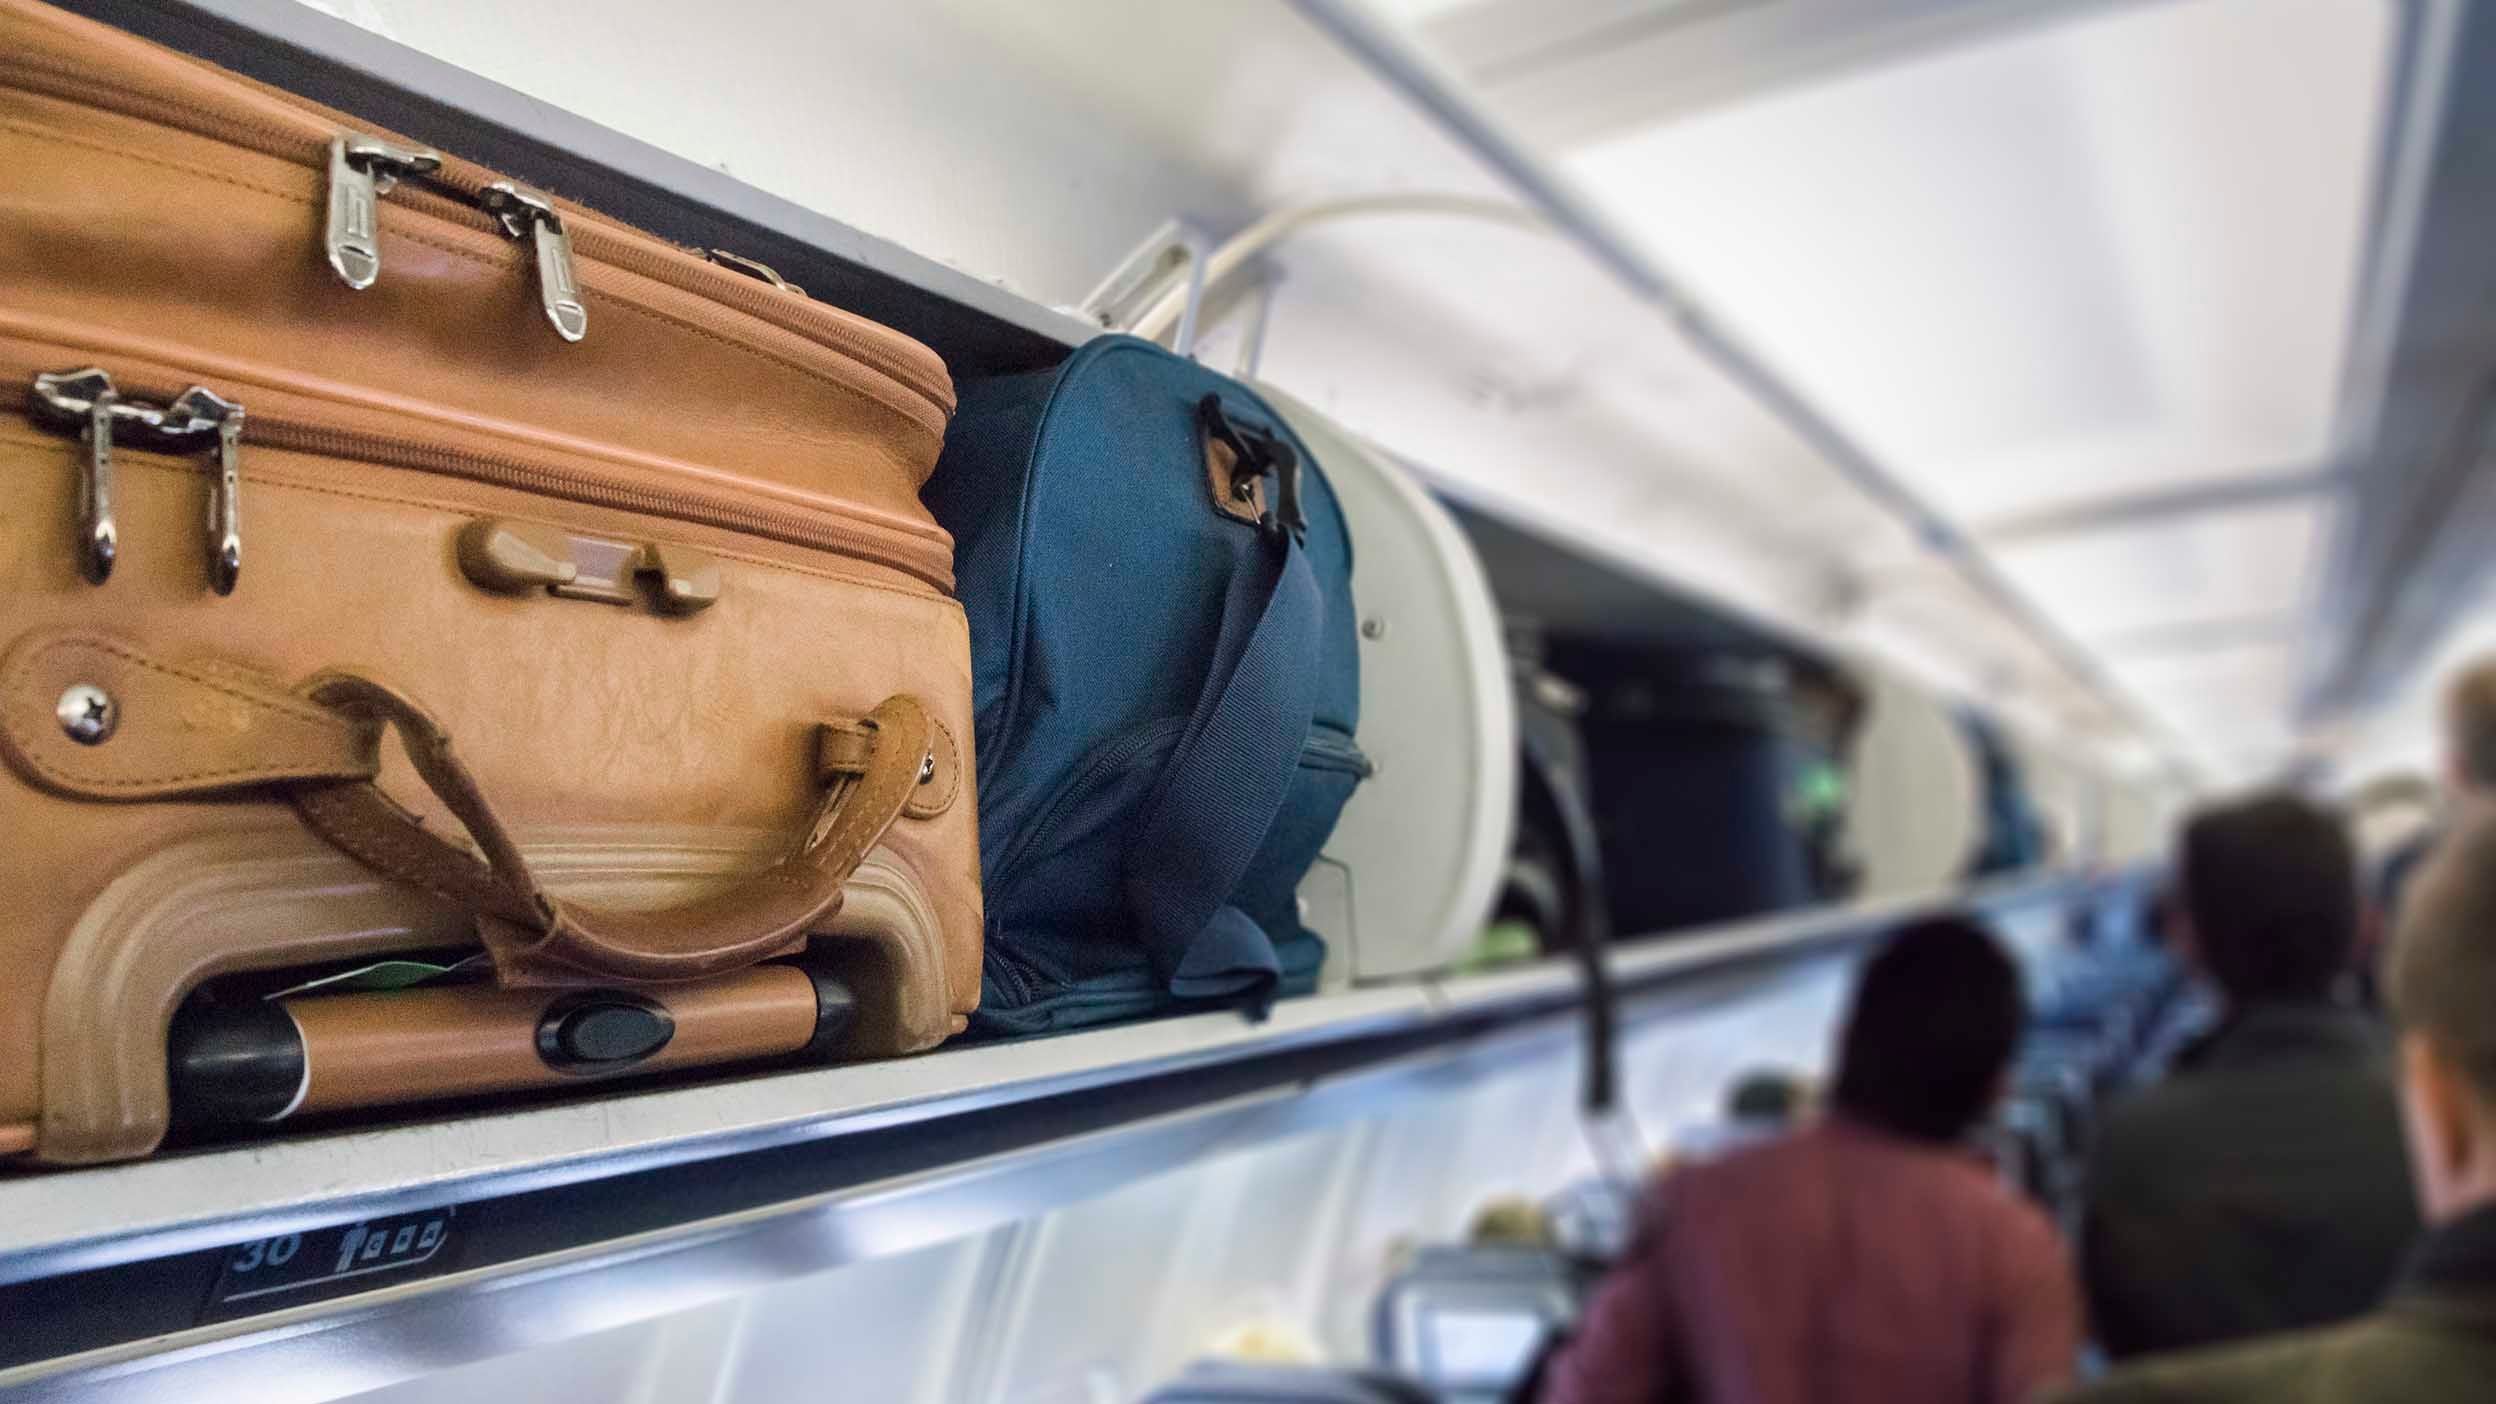 Luggage for travel and the case for economic optimism